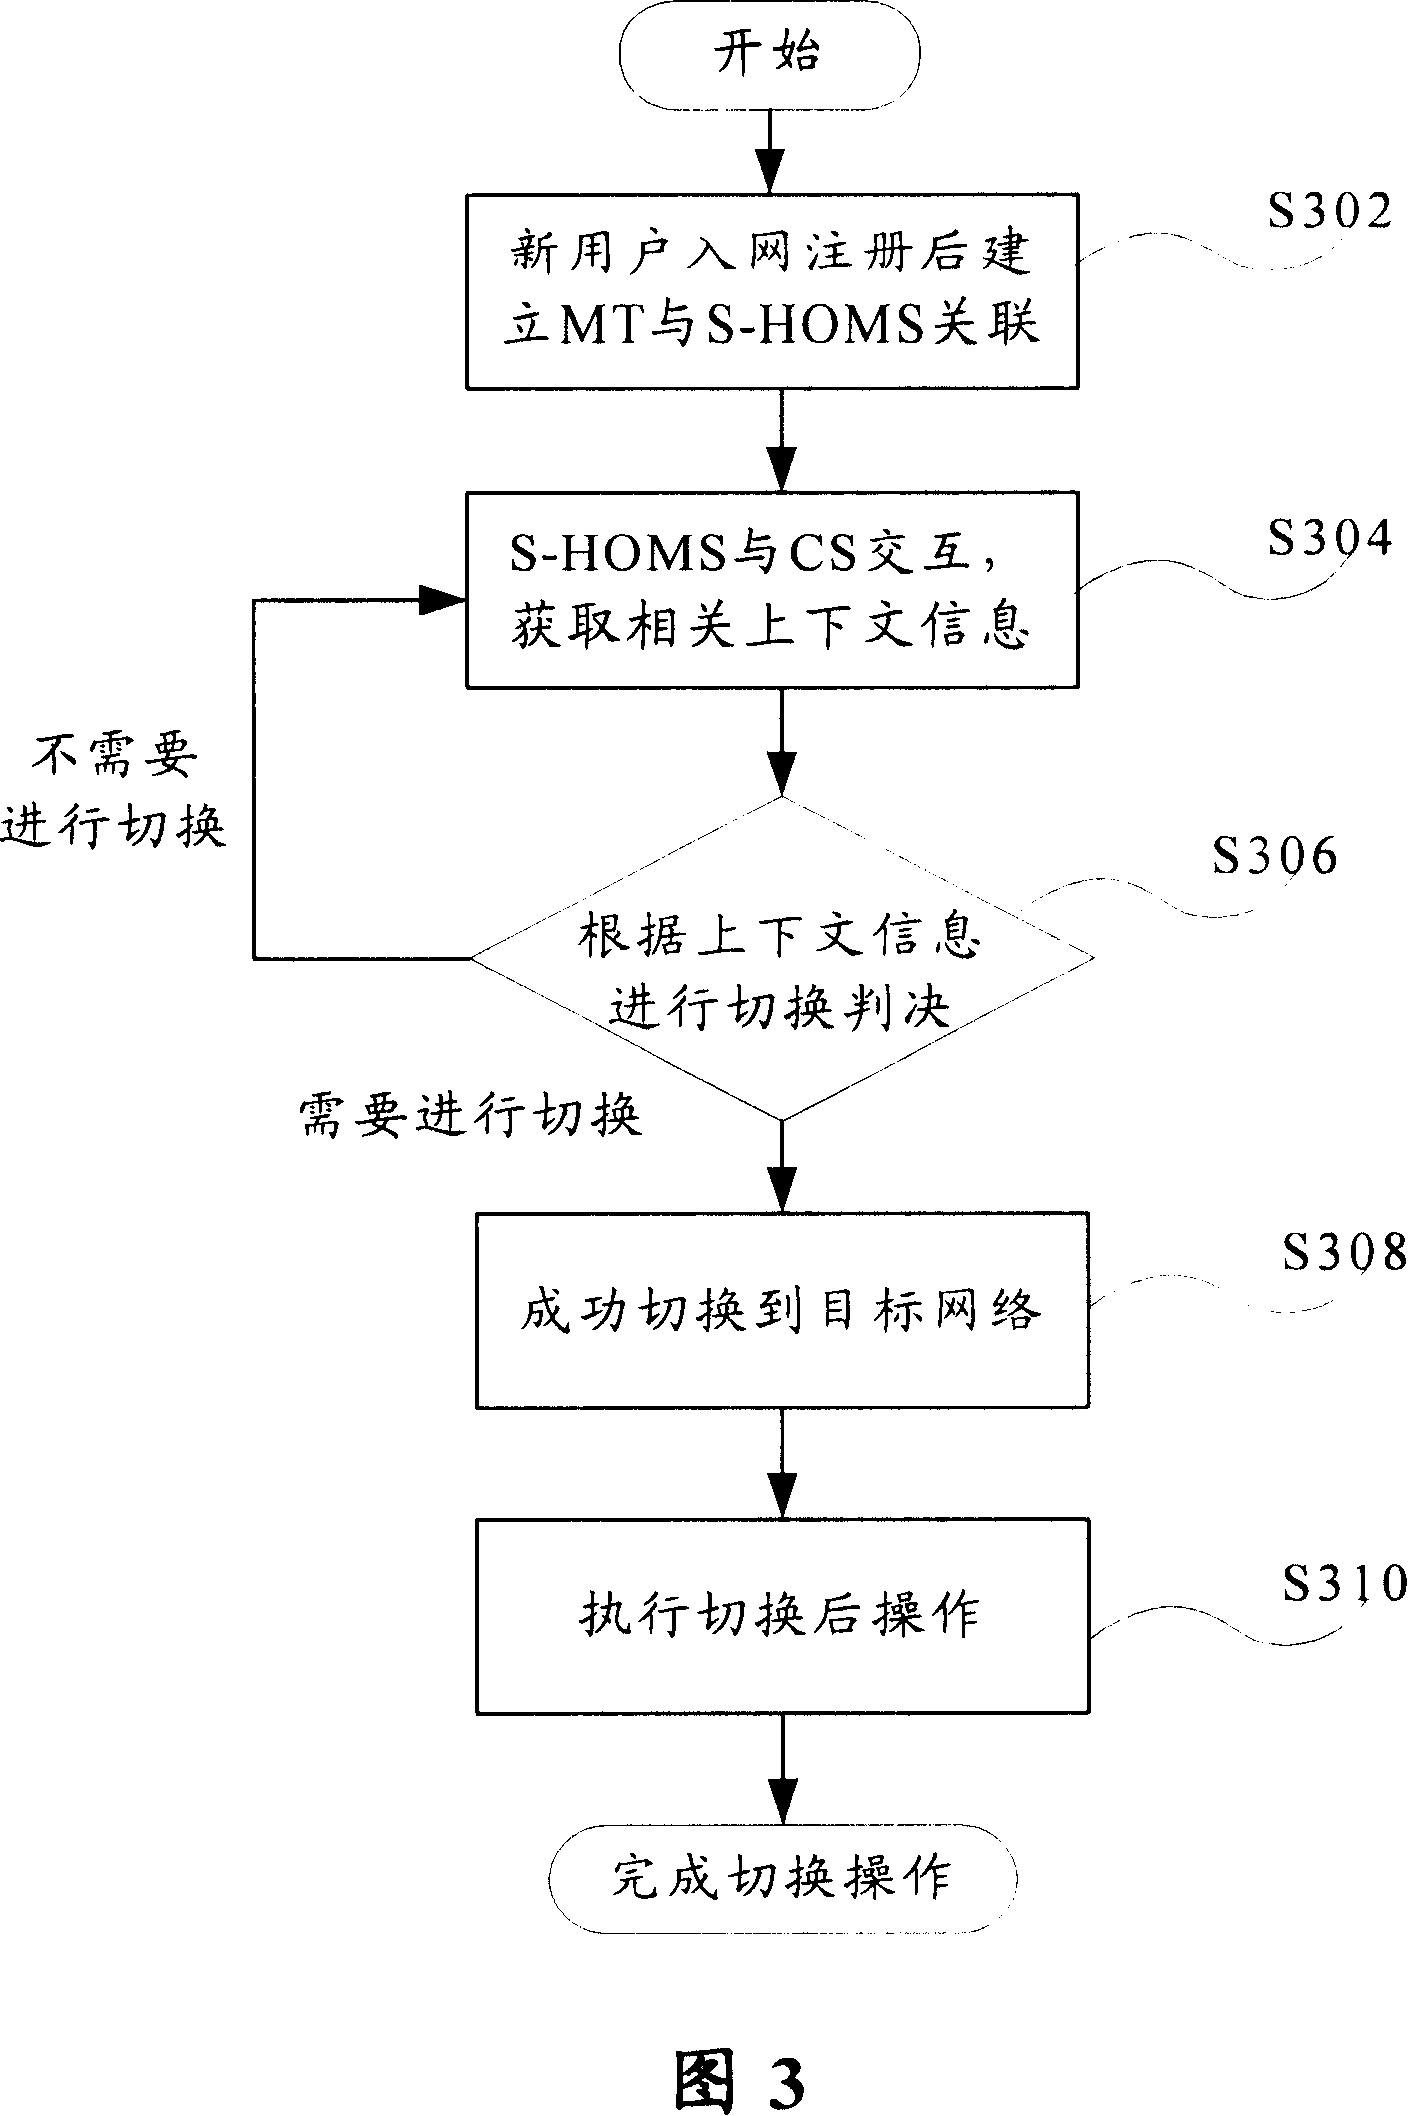 Cross-domain heterogeneous network system and adjacent network switching method and device